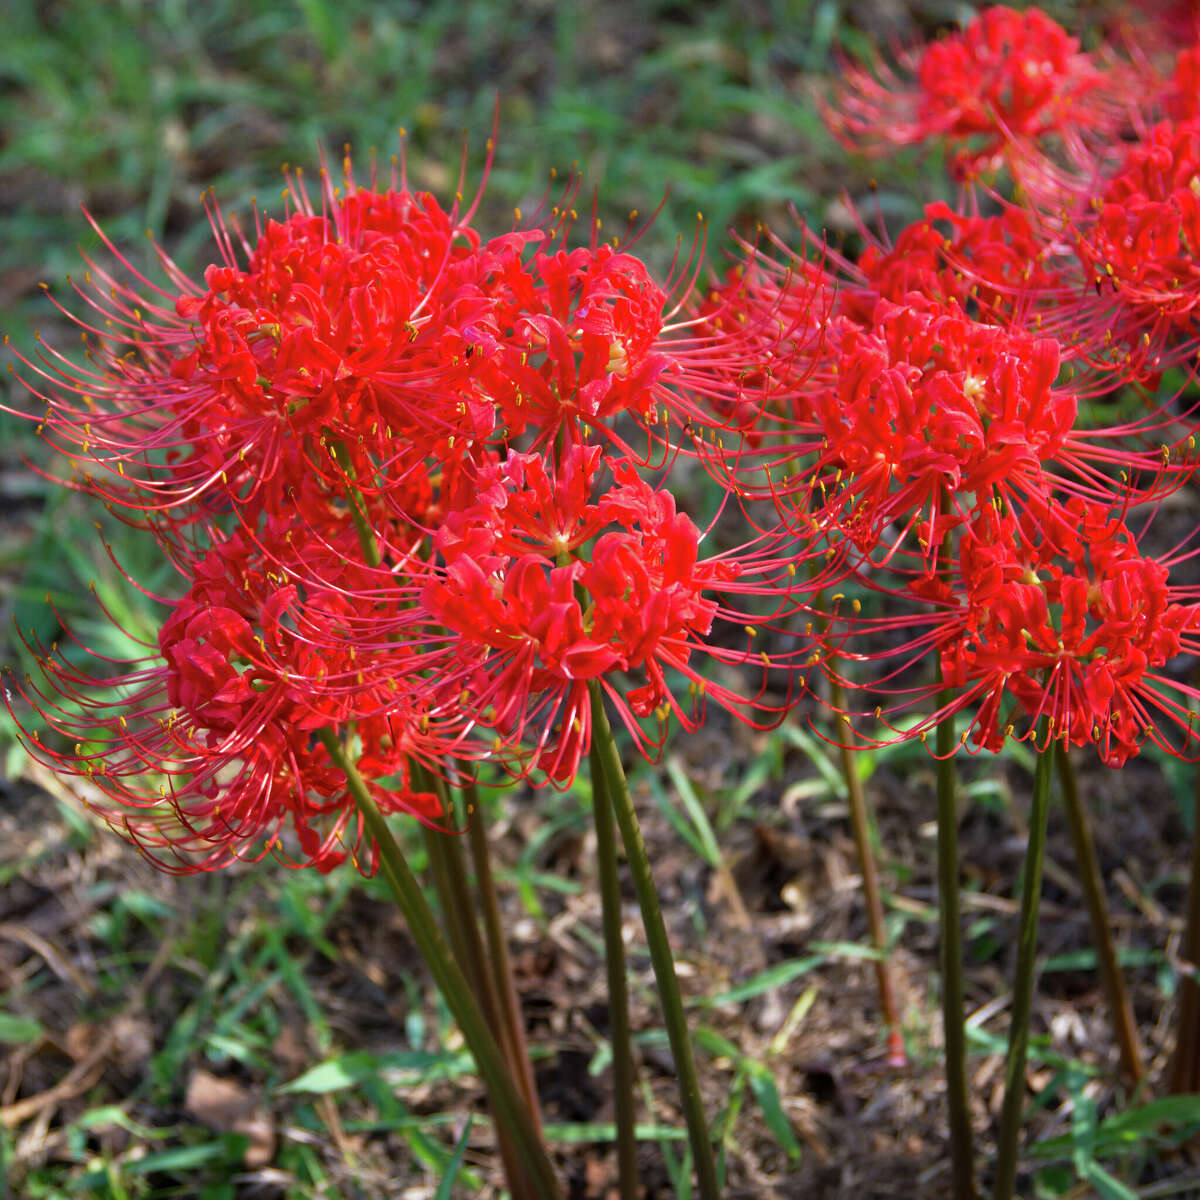 Spider lilies' flowers are followed by foliage